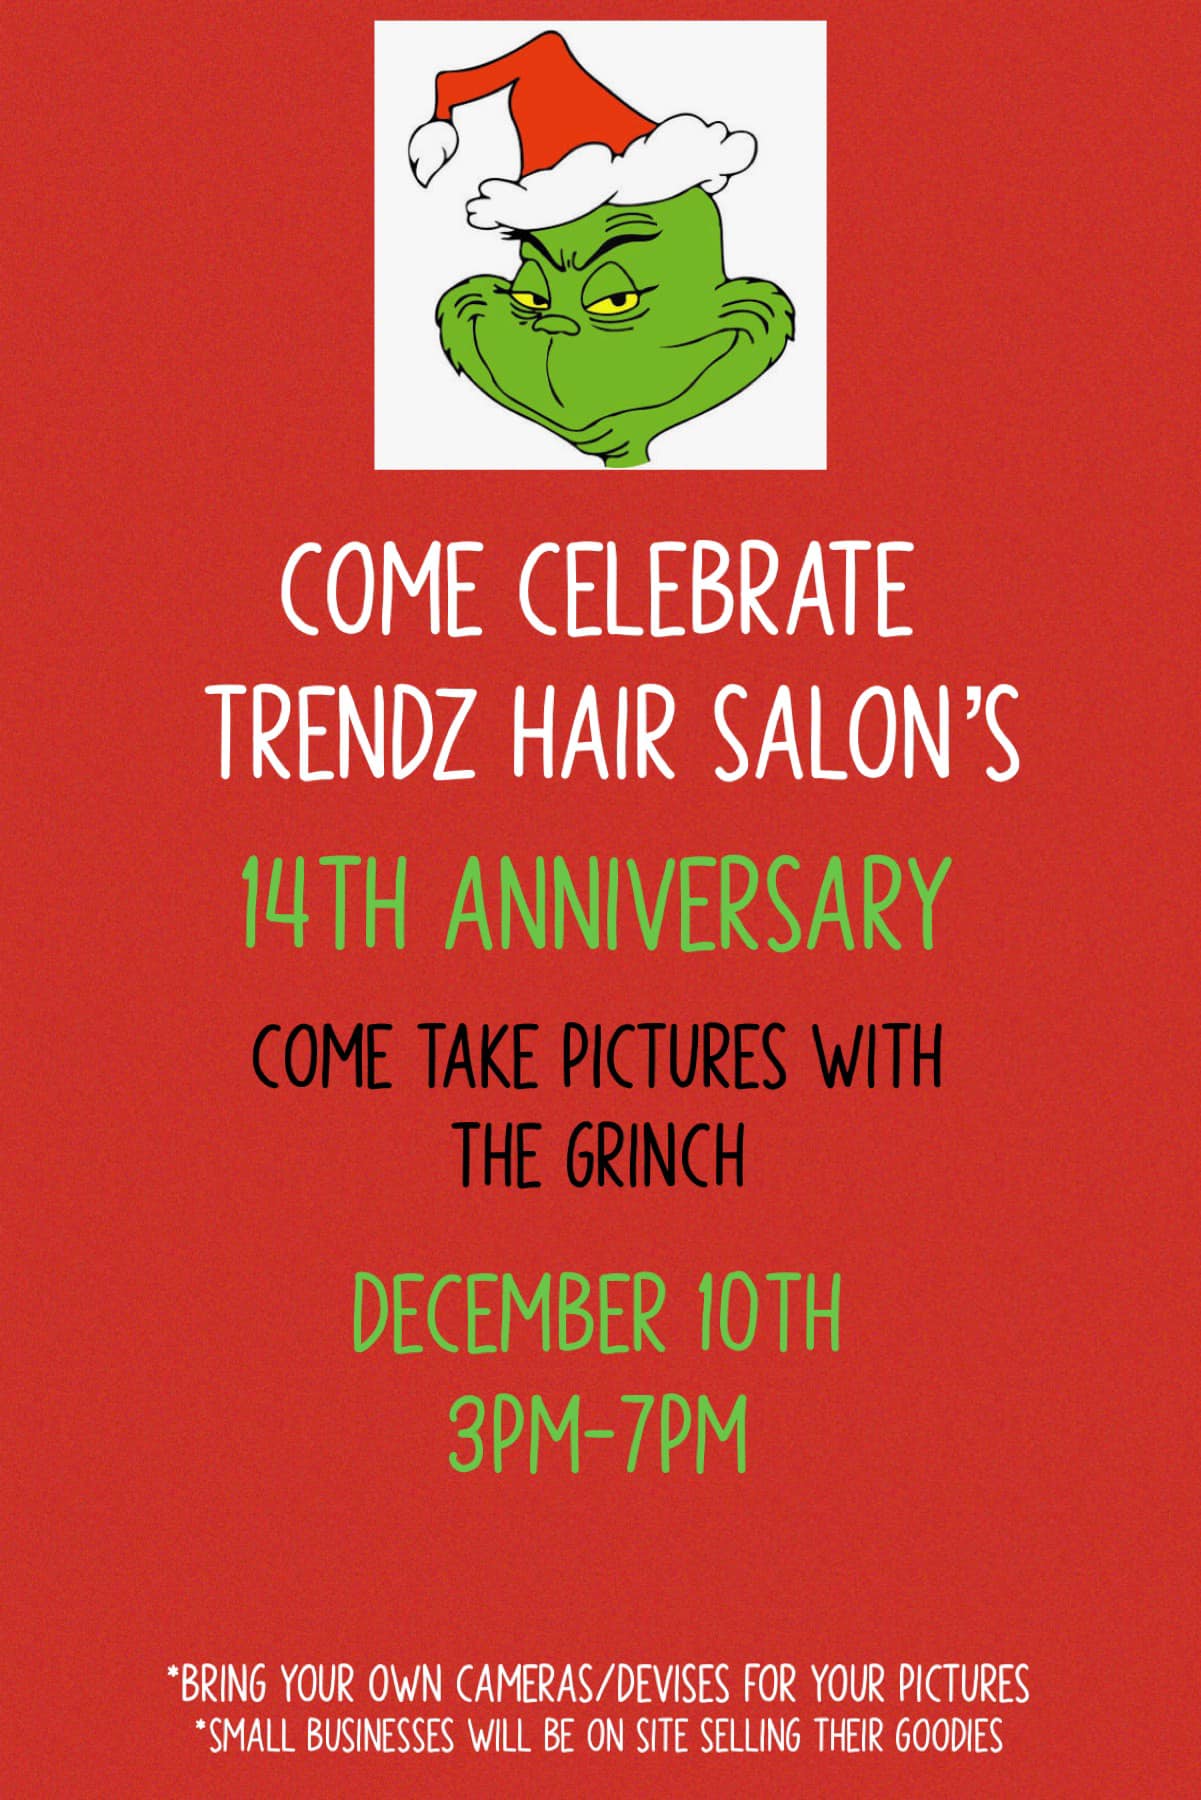 Trendz Hair Salon 401 s gold ave, Deming New Mexico 88030